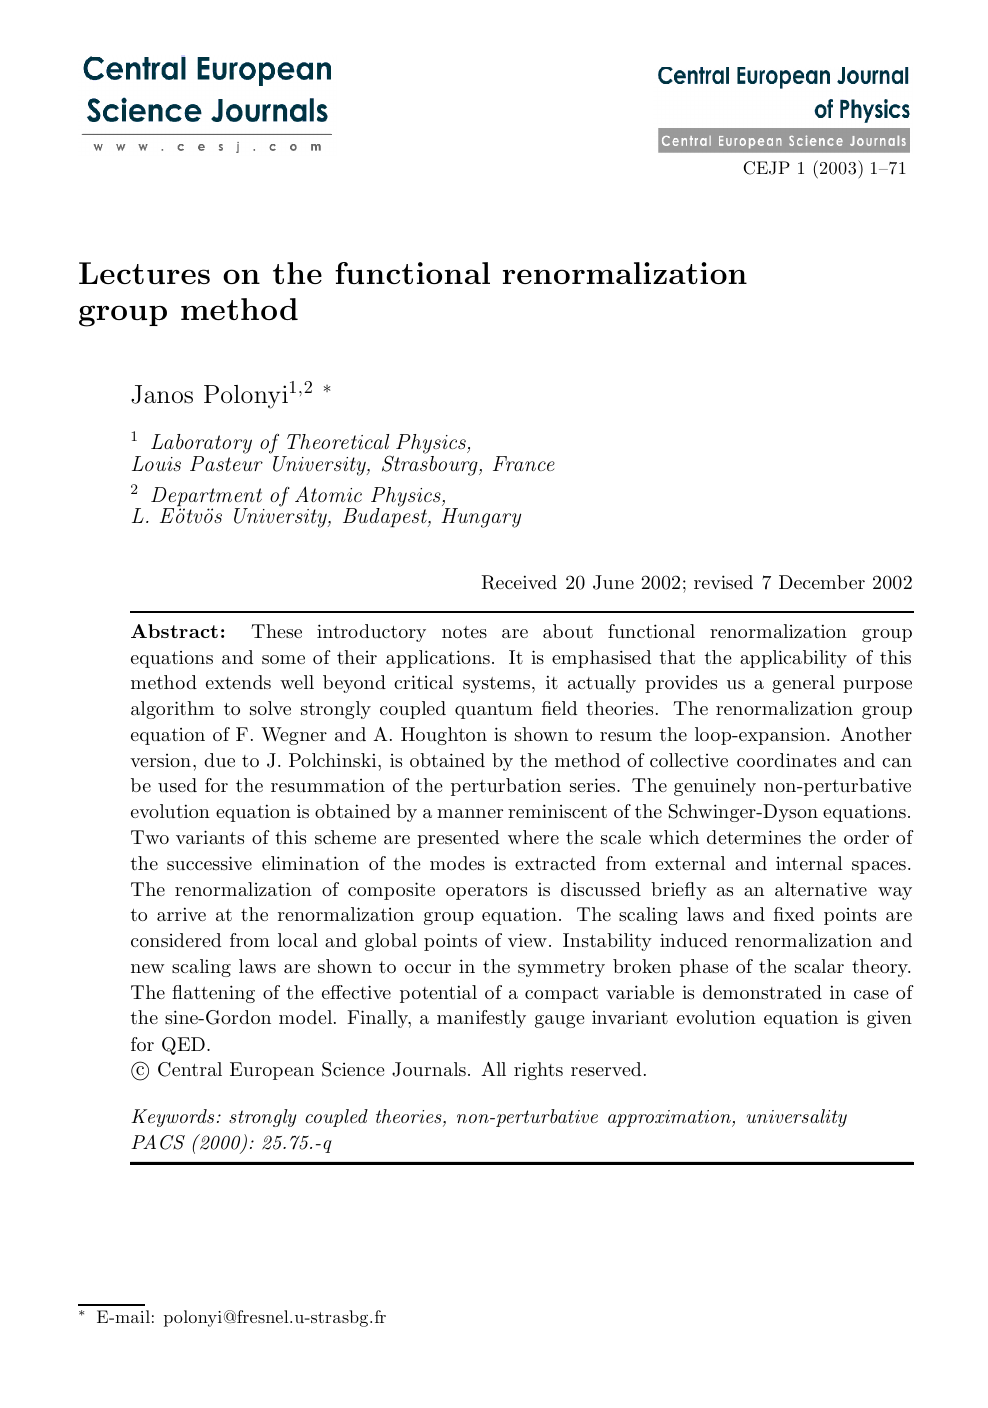 Lectures On The Functional Renormalization Group Method Topic Of Research Paper In Physical Sciences Download Scholarly Article Pdf And Read For Free On Cyberleninka Open Science Hub